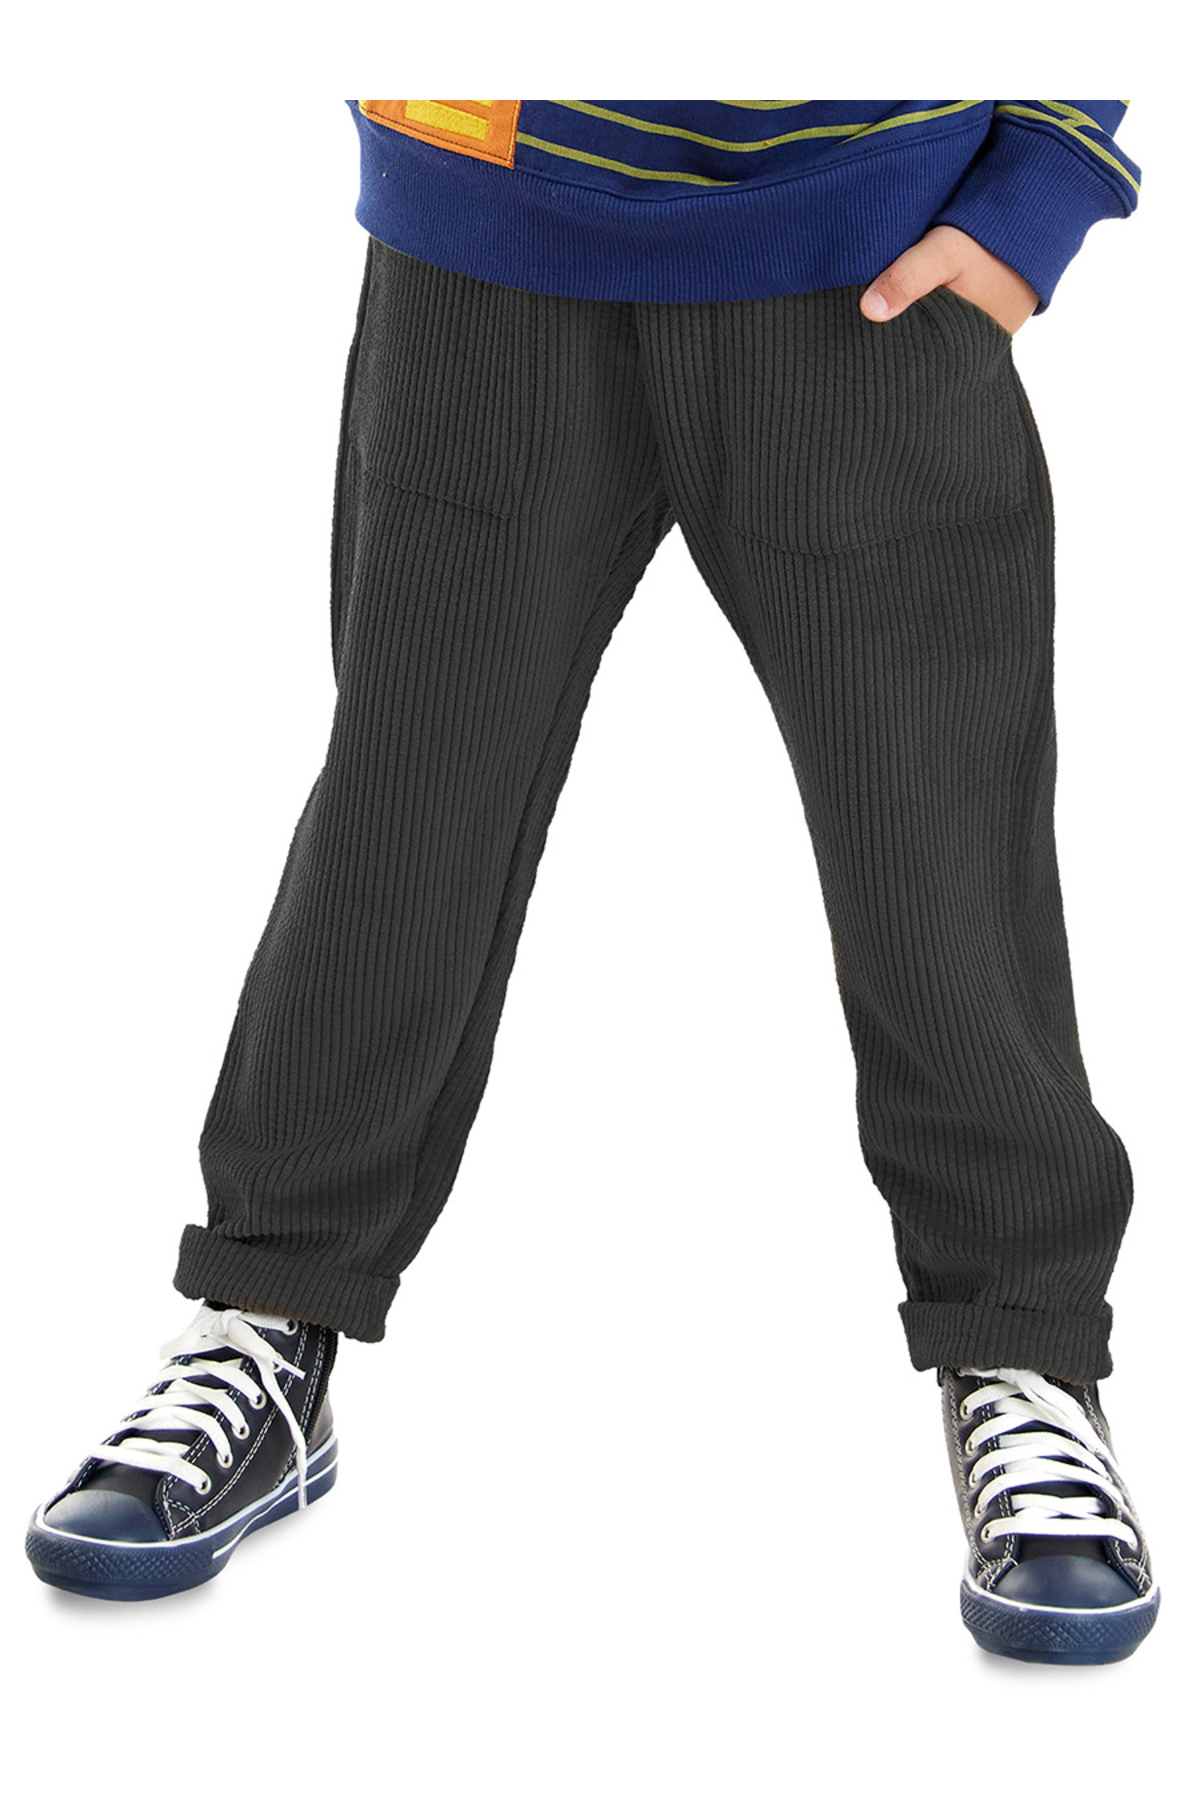 Mushi Corduroy Anthracite Boys' Trousers